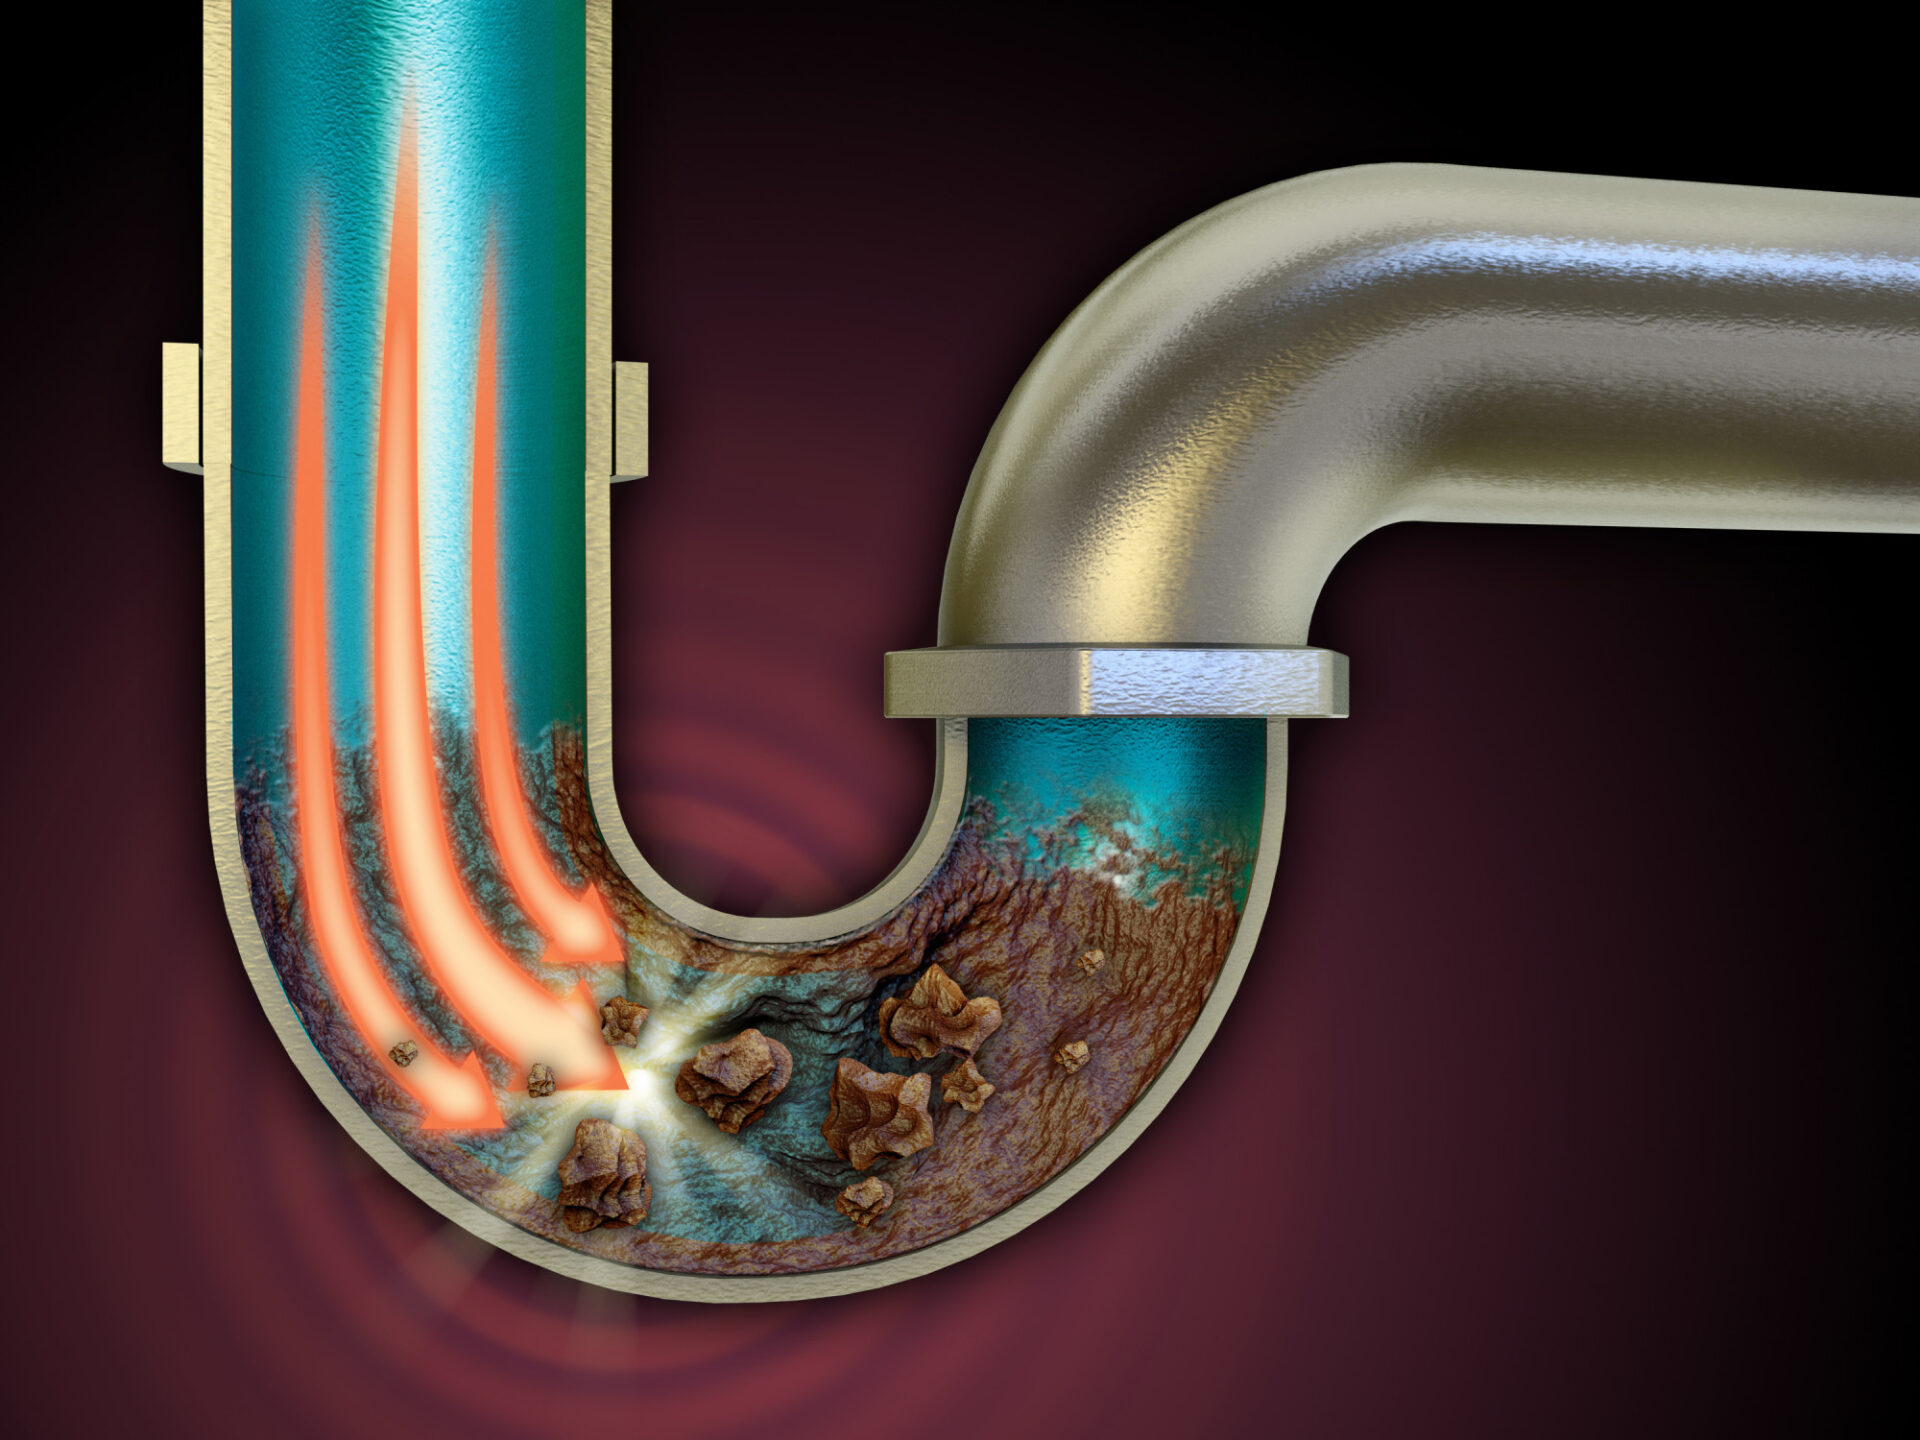 Leaking AC: Plumbing Services for Your AC Drain Pipe